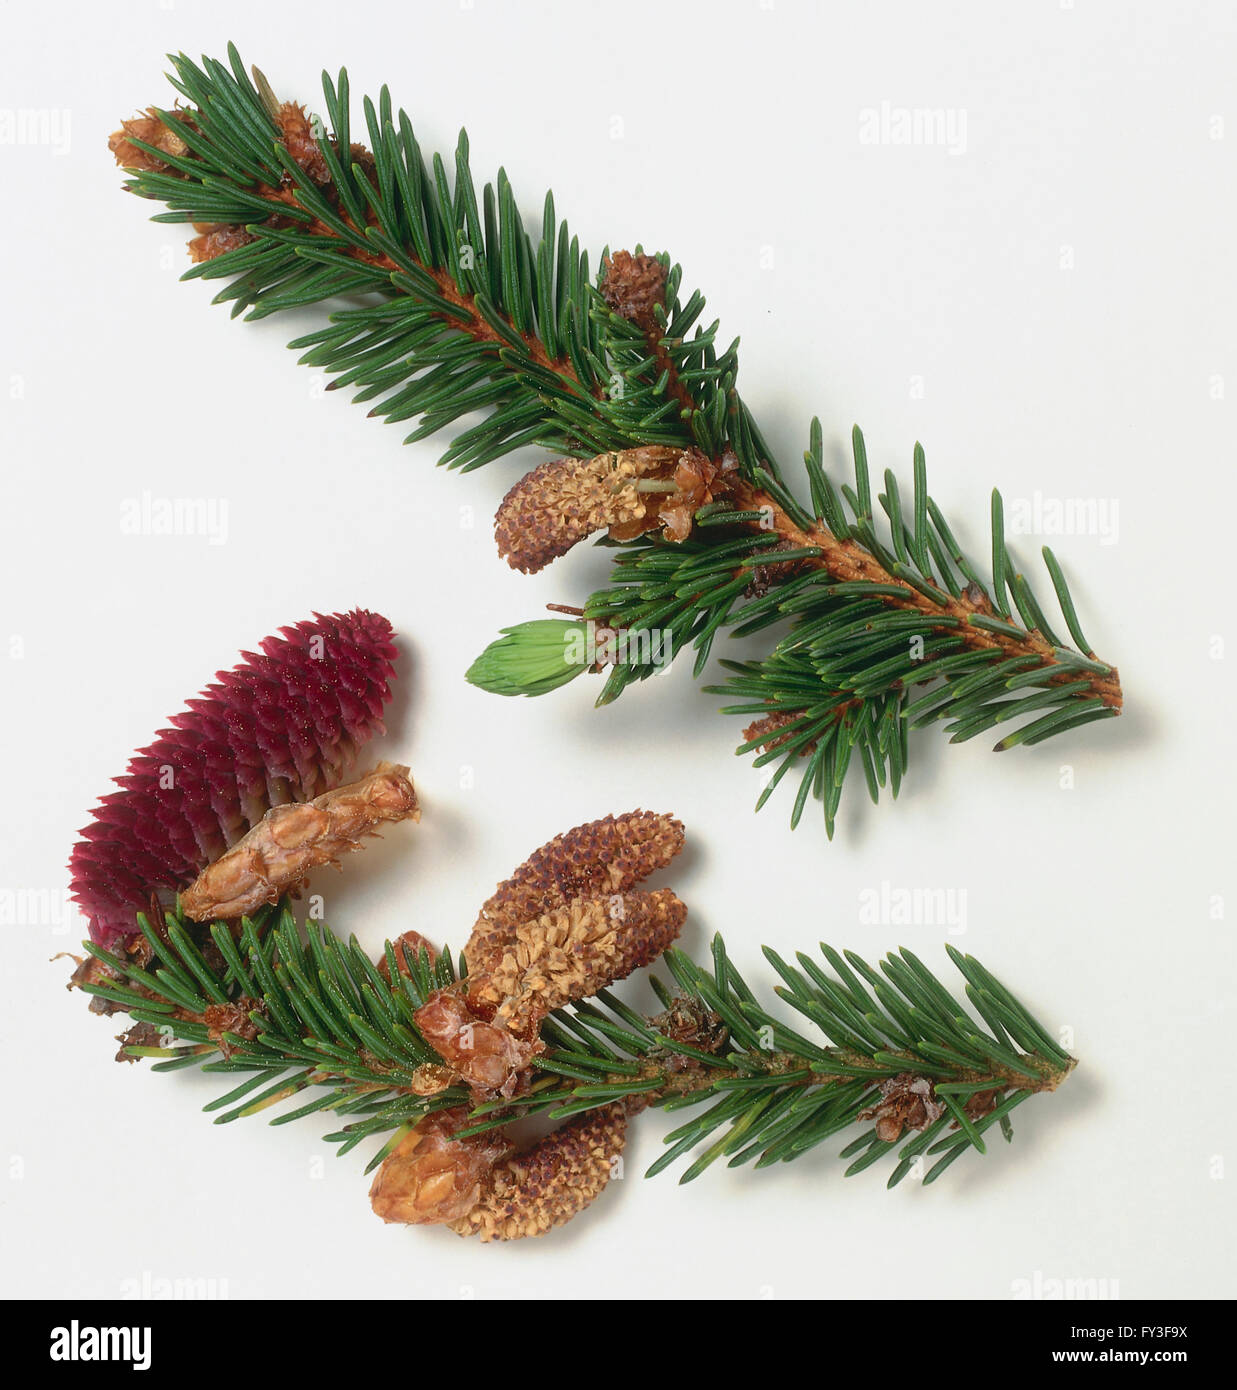 Picea abies (Norway spruce): Two stems with green leaves, flower clusters and cone. Stock Photo